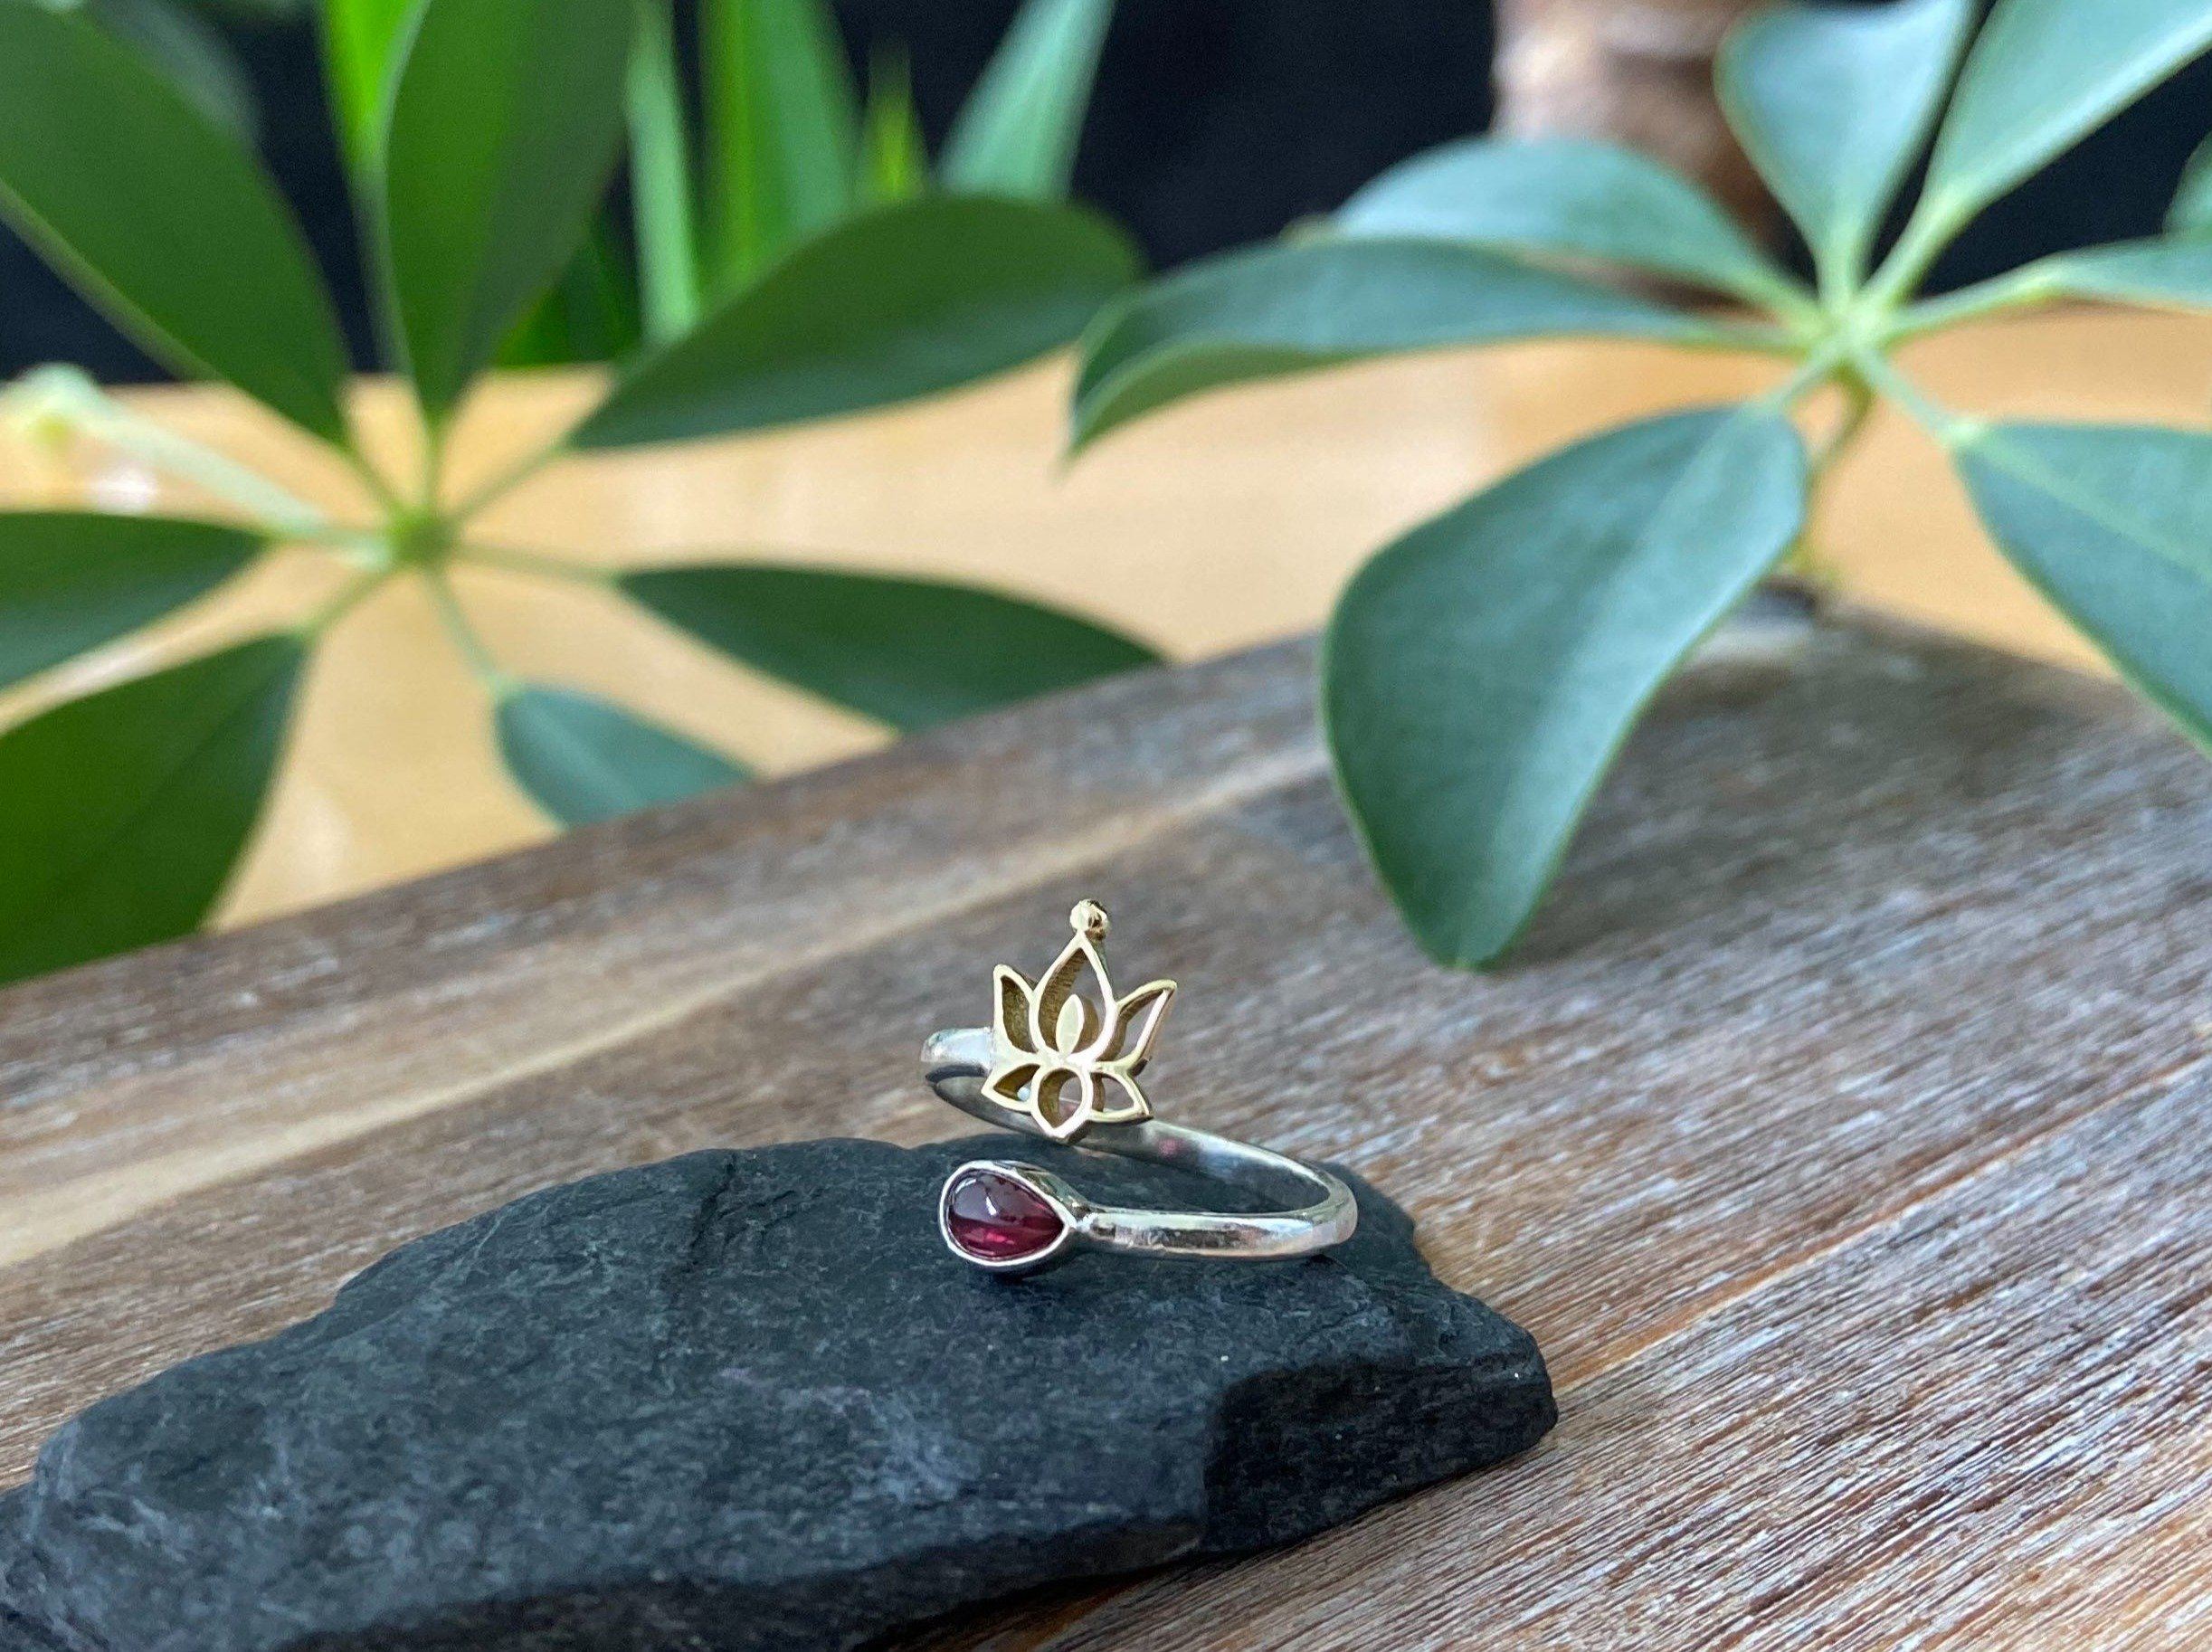 Buy Silver Lotus Flower Toe Ring Gold Lotus Toe Ring Summer Toe Ring  Adjustable Toe Ring as Gift Midi Ring Gift for Her Mothers Online in India  - Etsy